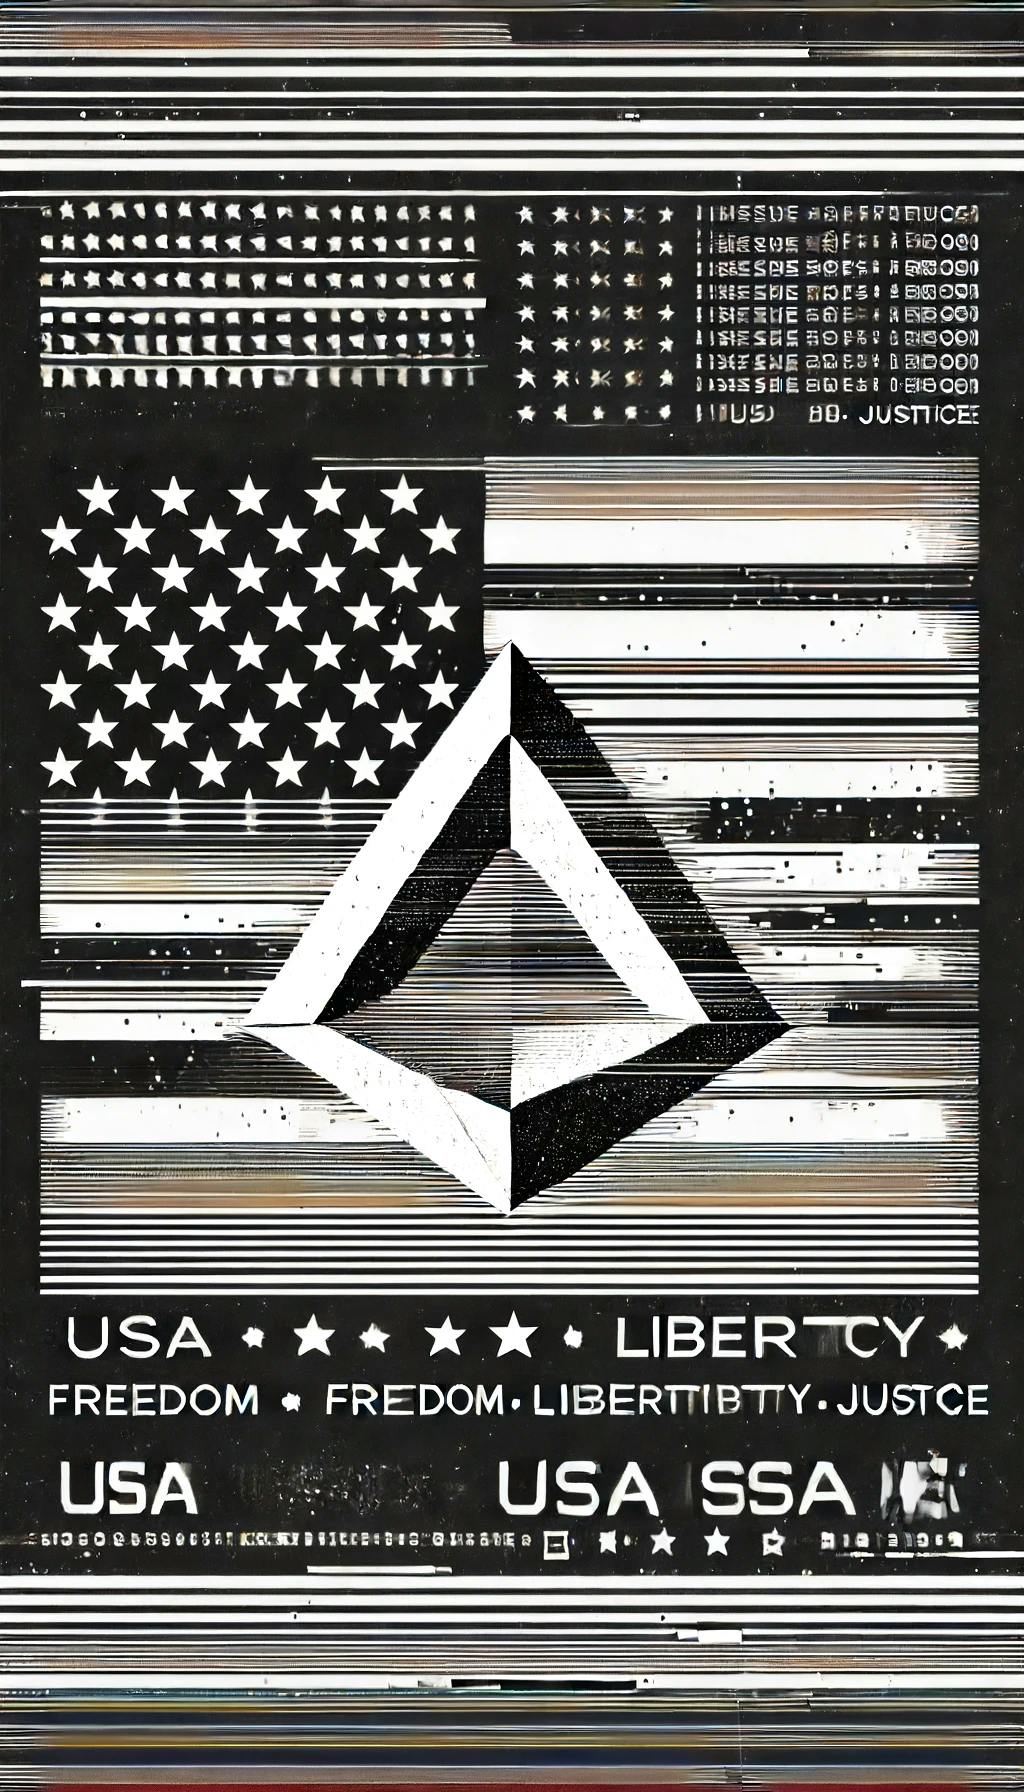 DALL·E 2024-06-18 08.50.16 - Create a very simple and elegant glitch art style image with a USA patriotic theme in black and white, featuring a clear 3D tetrahedron. Focus on the .webp